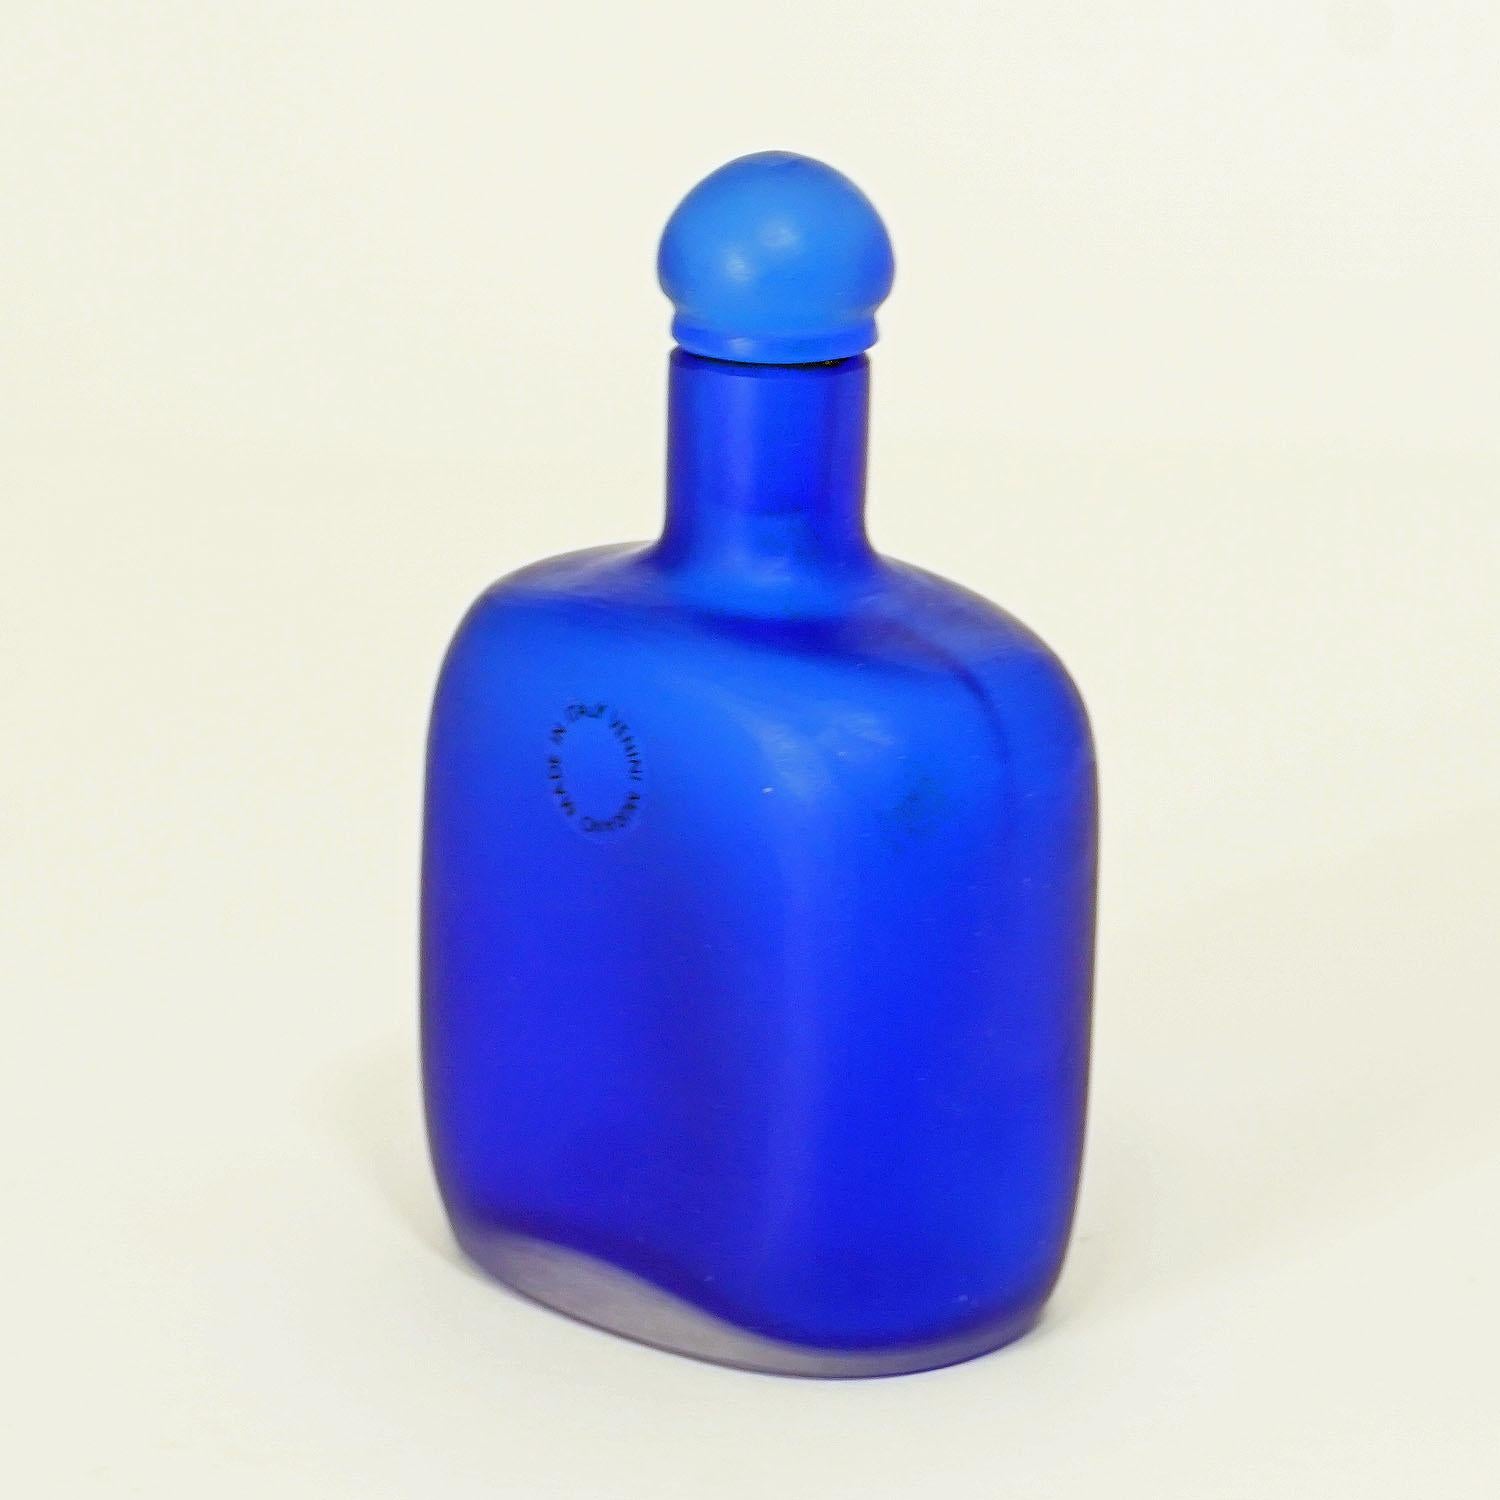 A great glass flacon designed by Paolo Venini in 1968, manufactured by Venini, Venice in 1992. Blue casted glass with incised surface, etched signature 'venini 92' on the base.

Measures: Width 3.35